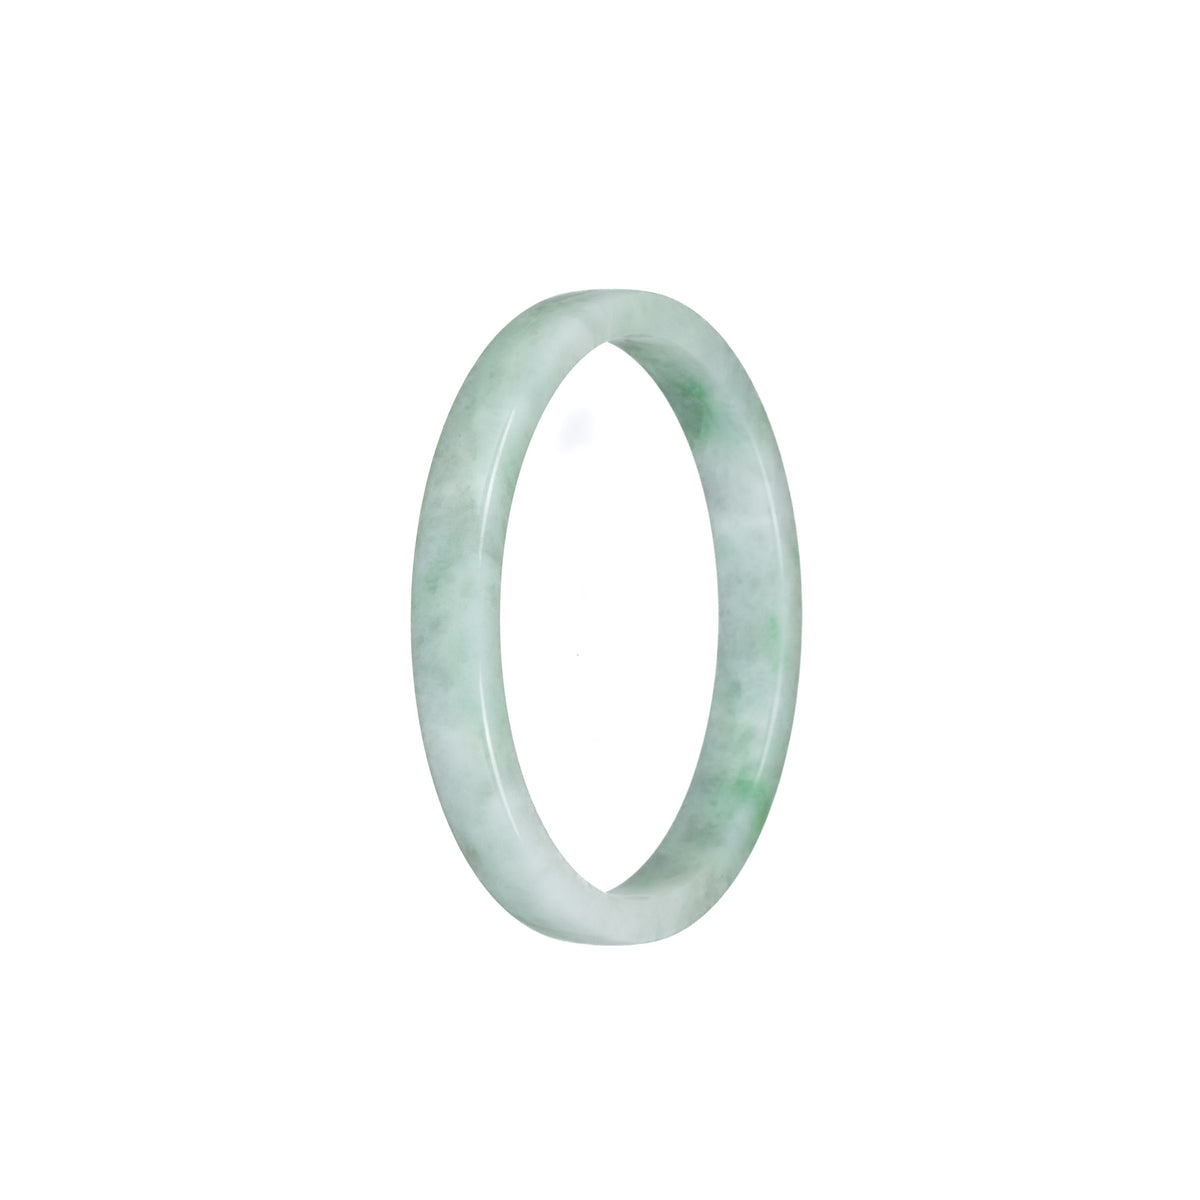 Genuine Type A Pale Green with Green Pattern Jadeite Jade Bangle - 52mm Flat